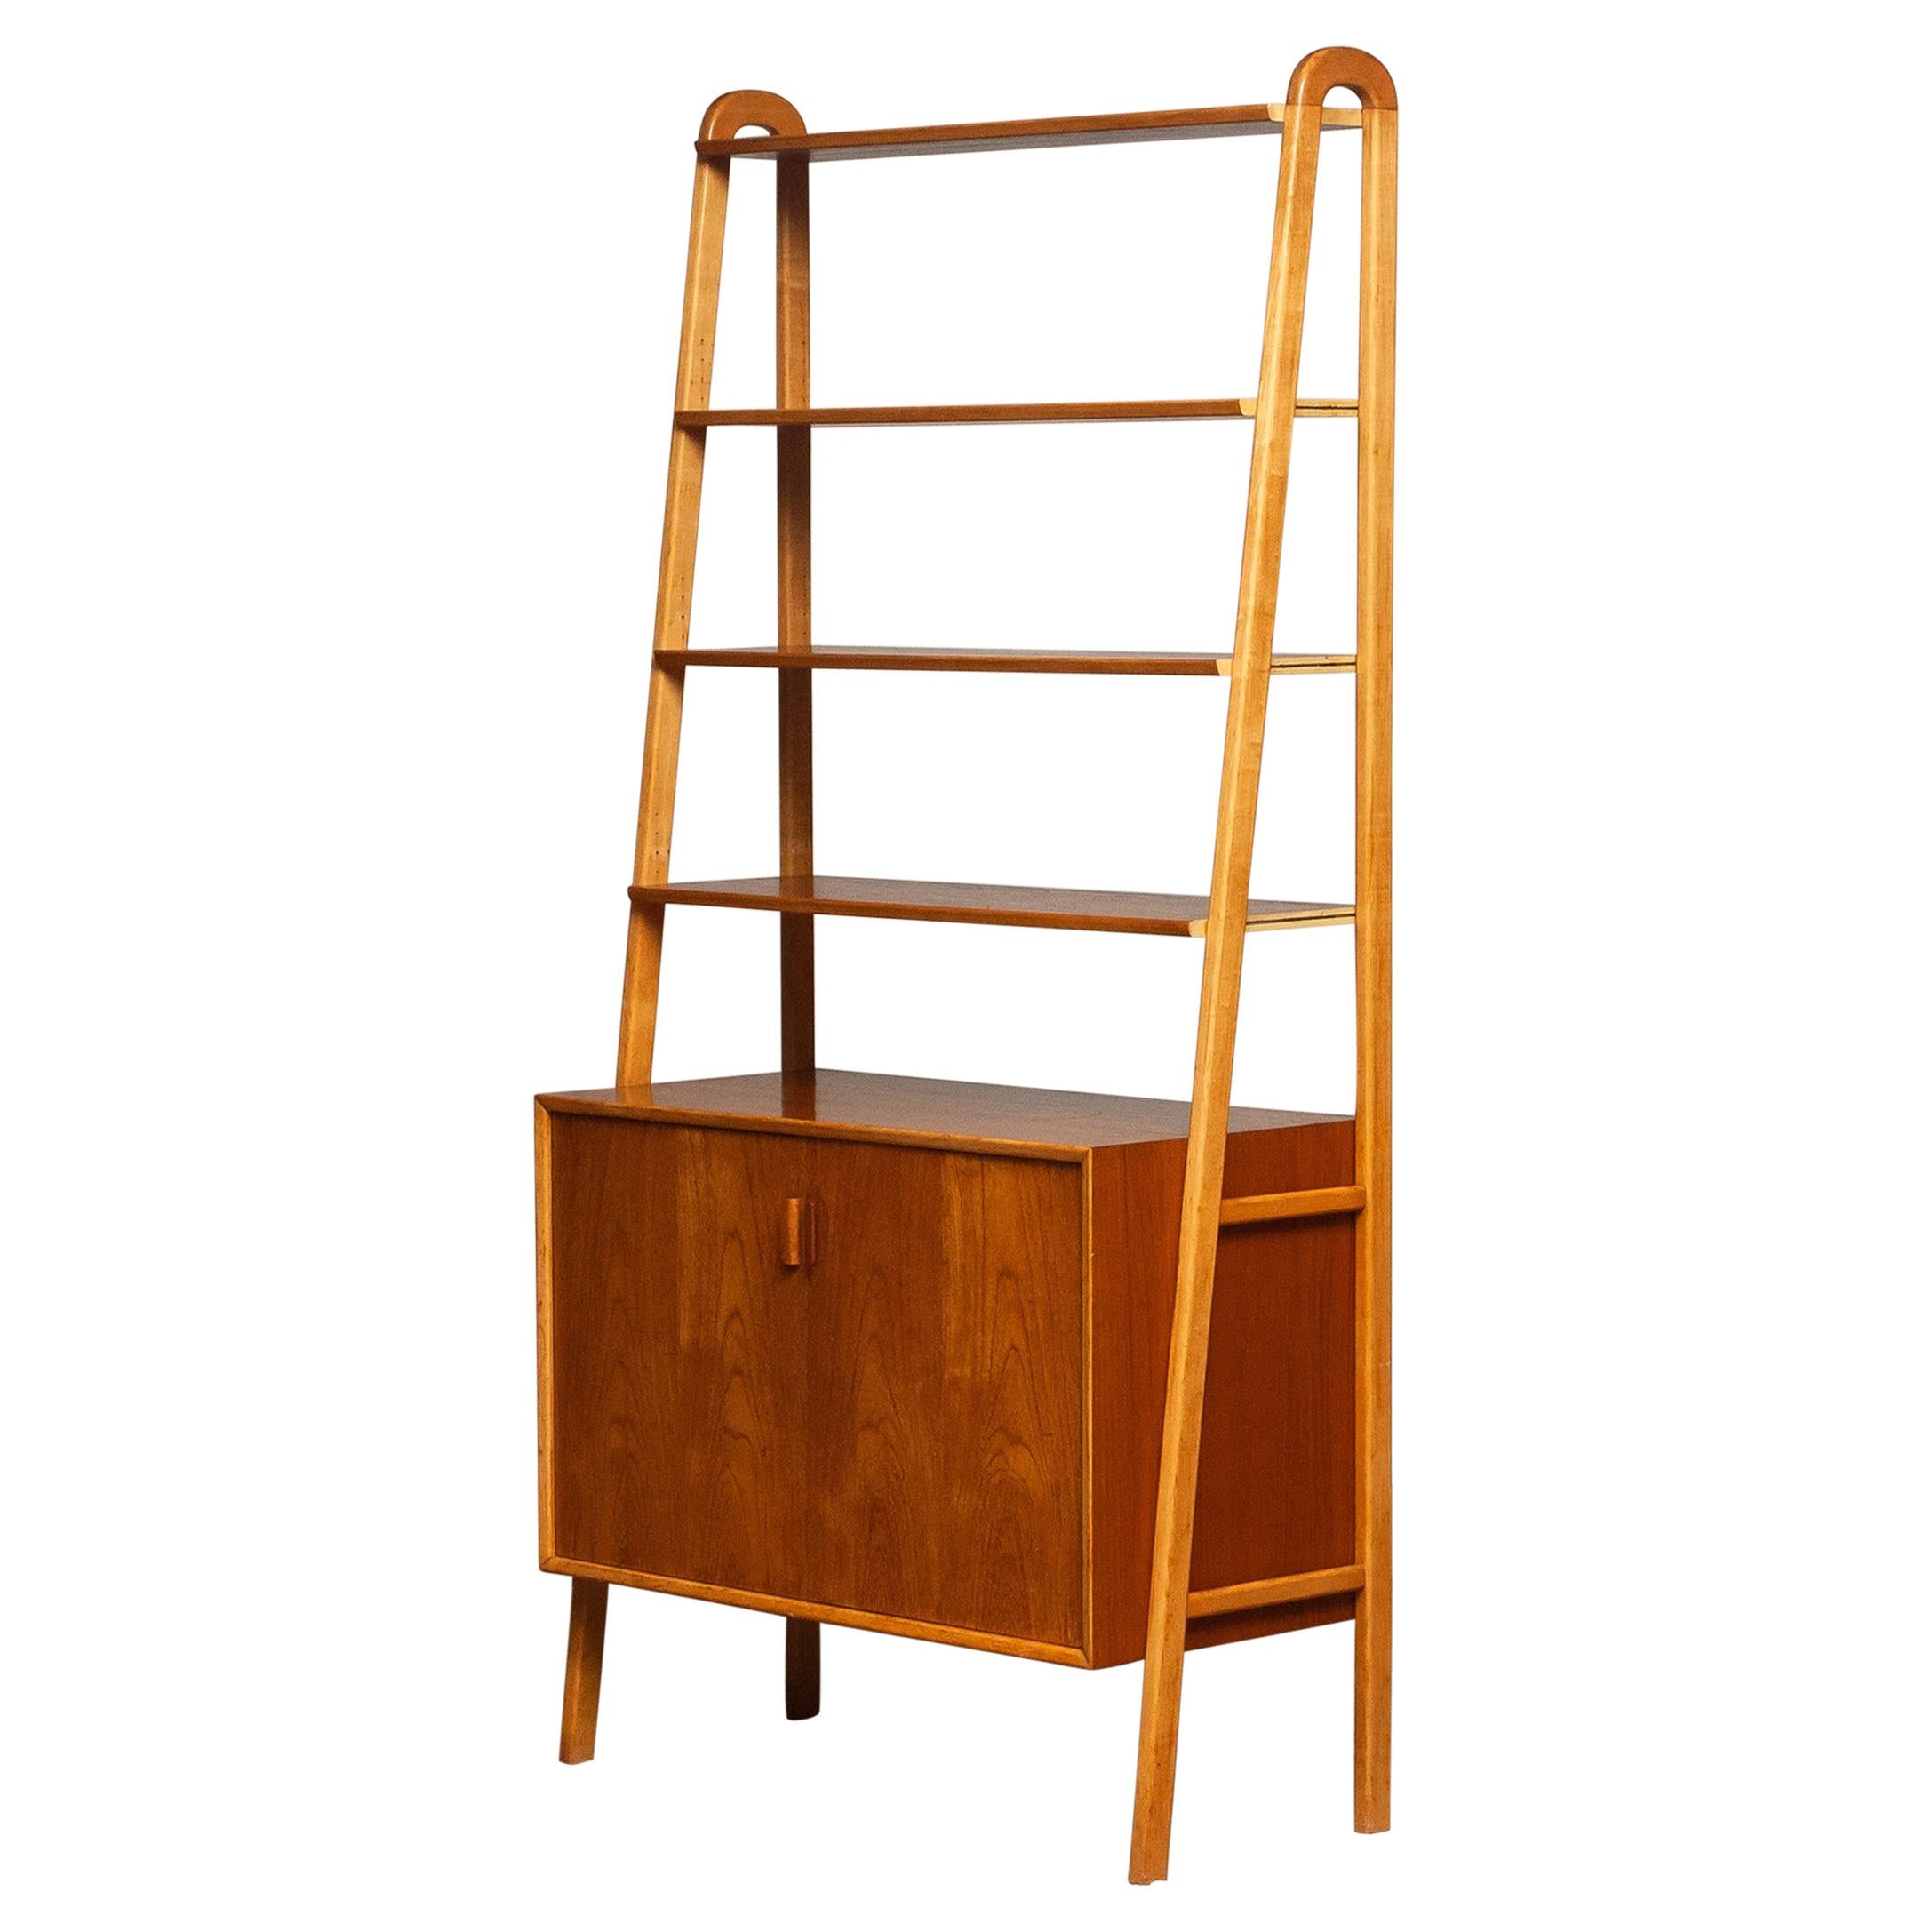 Beautiful and typical Swedish slim bookcase / shelfs cabinet in teak in combination with beech stands made by Brantorps, Sweden.
This cabinet consists four shelfs in which three are adjustable. The top shelf is fixed.
There is also an adjustable /